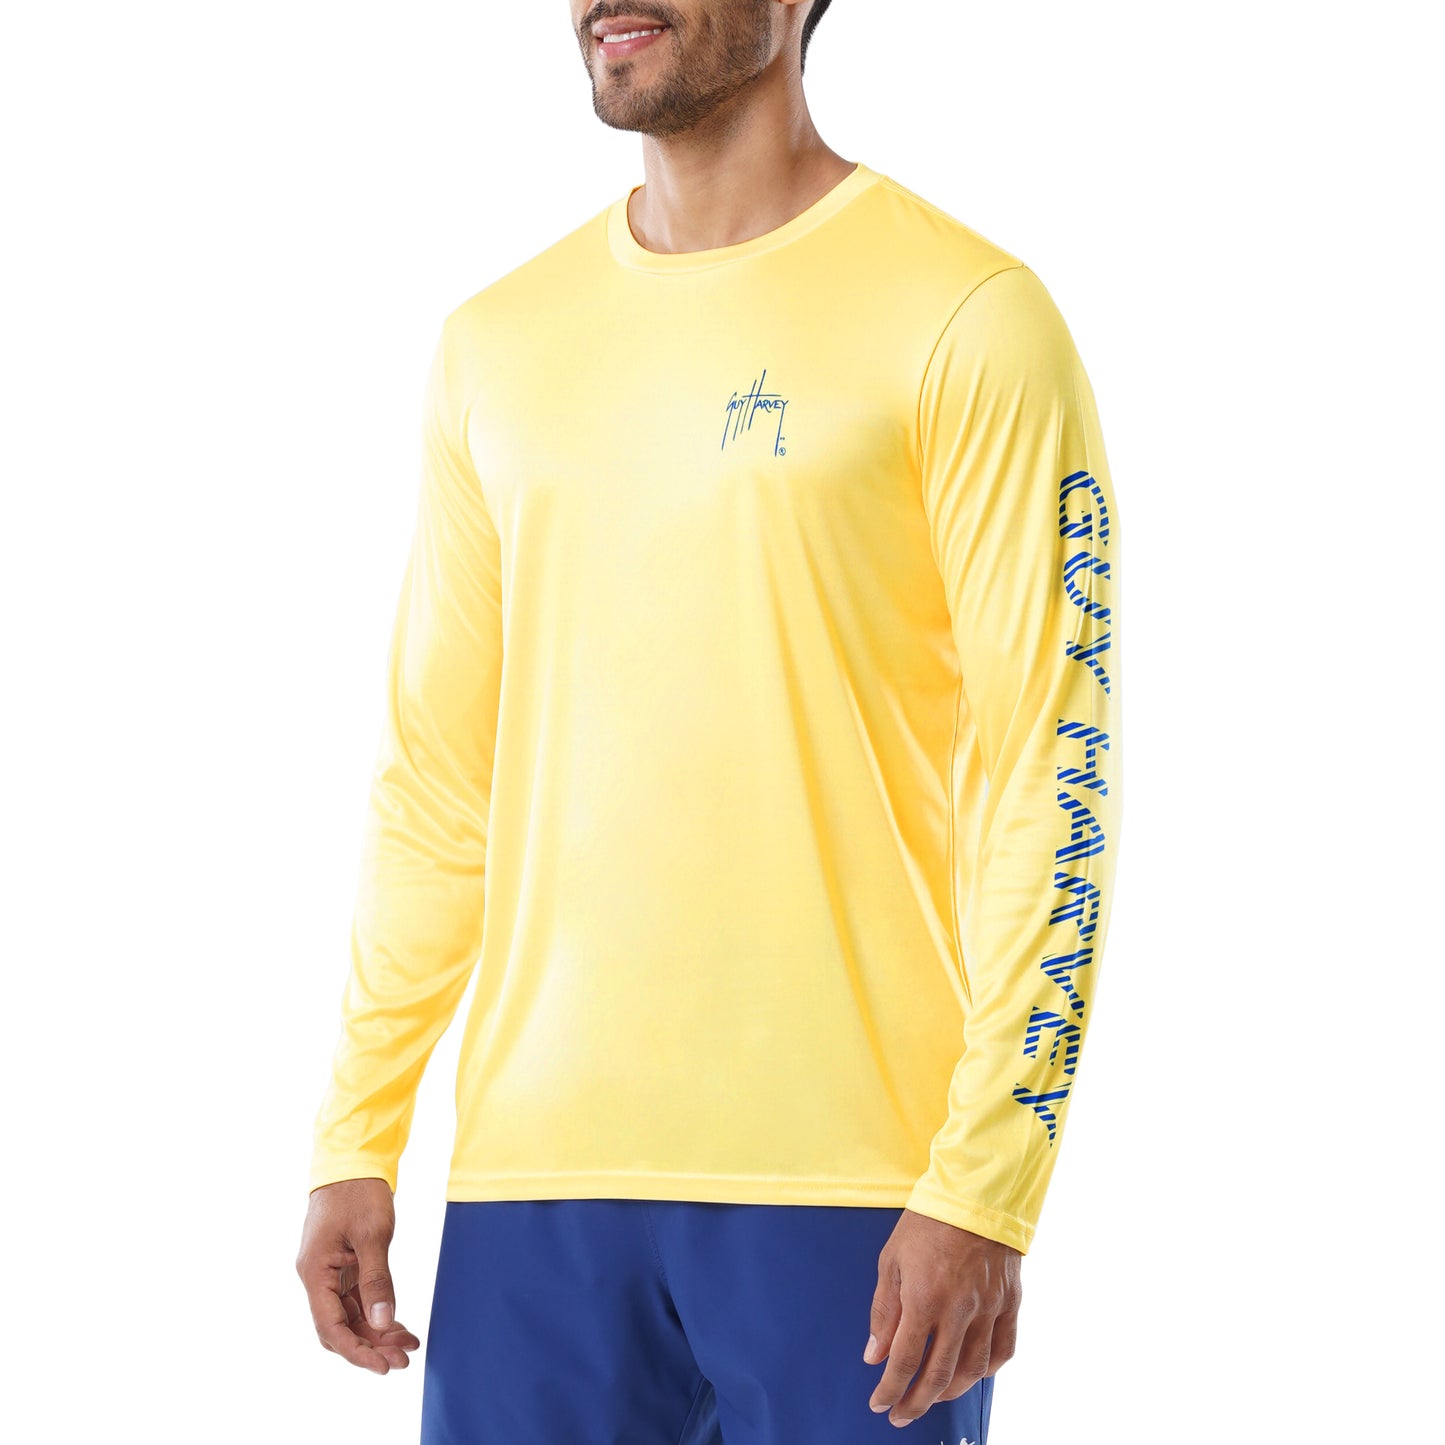 Men's The Art of Offshore Performance Sun Protection Top